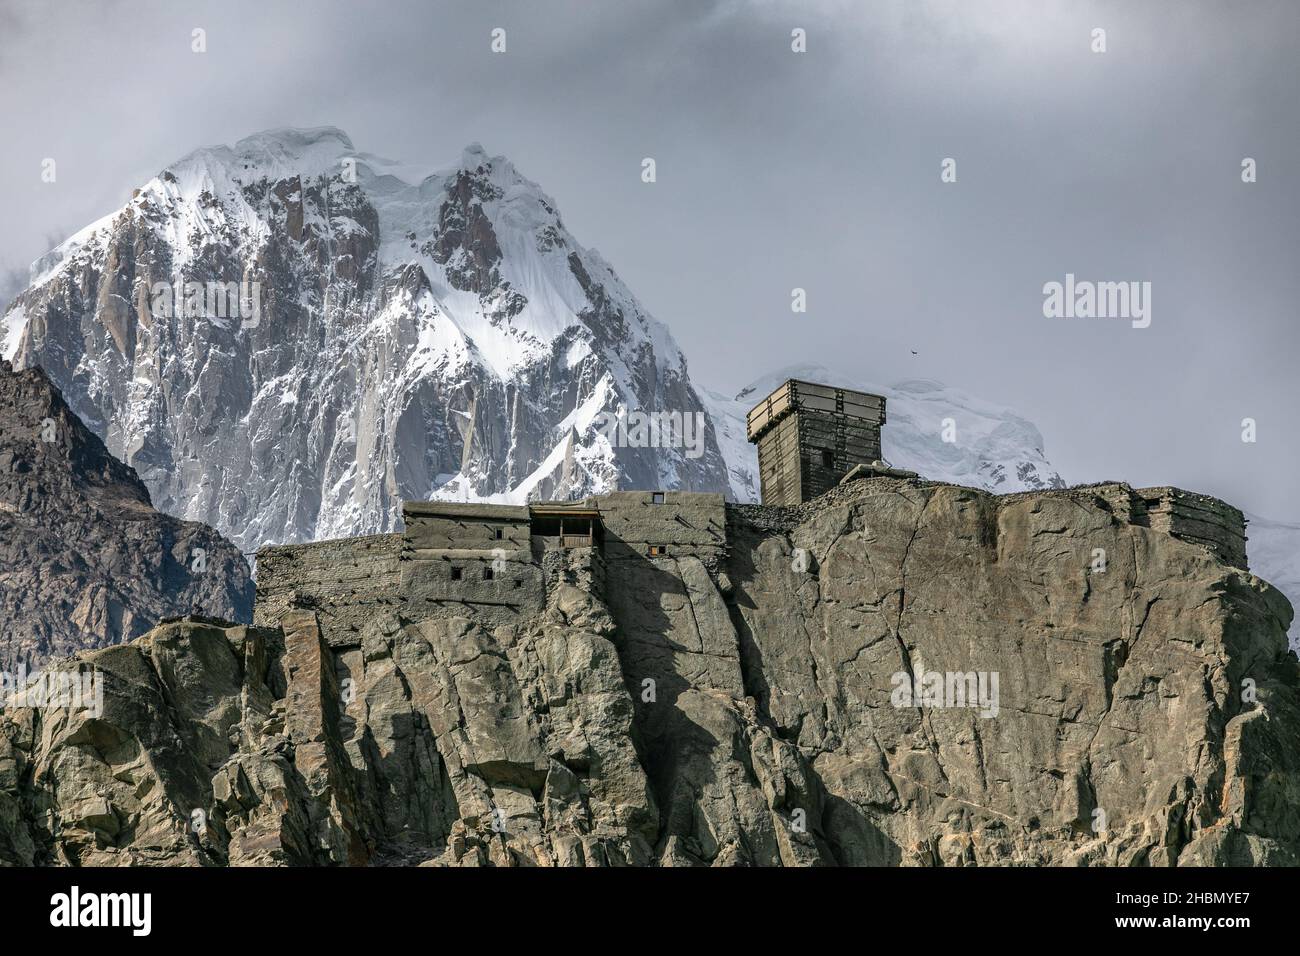 Ancient fort on the edge of the rock mountain landscape Stock Photo